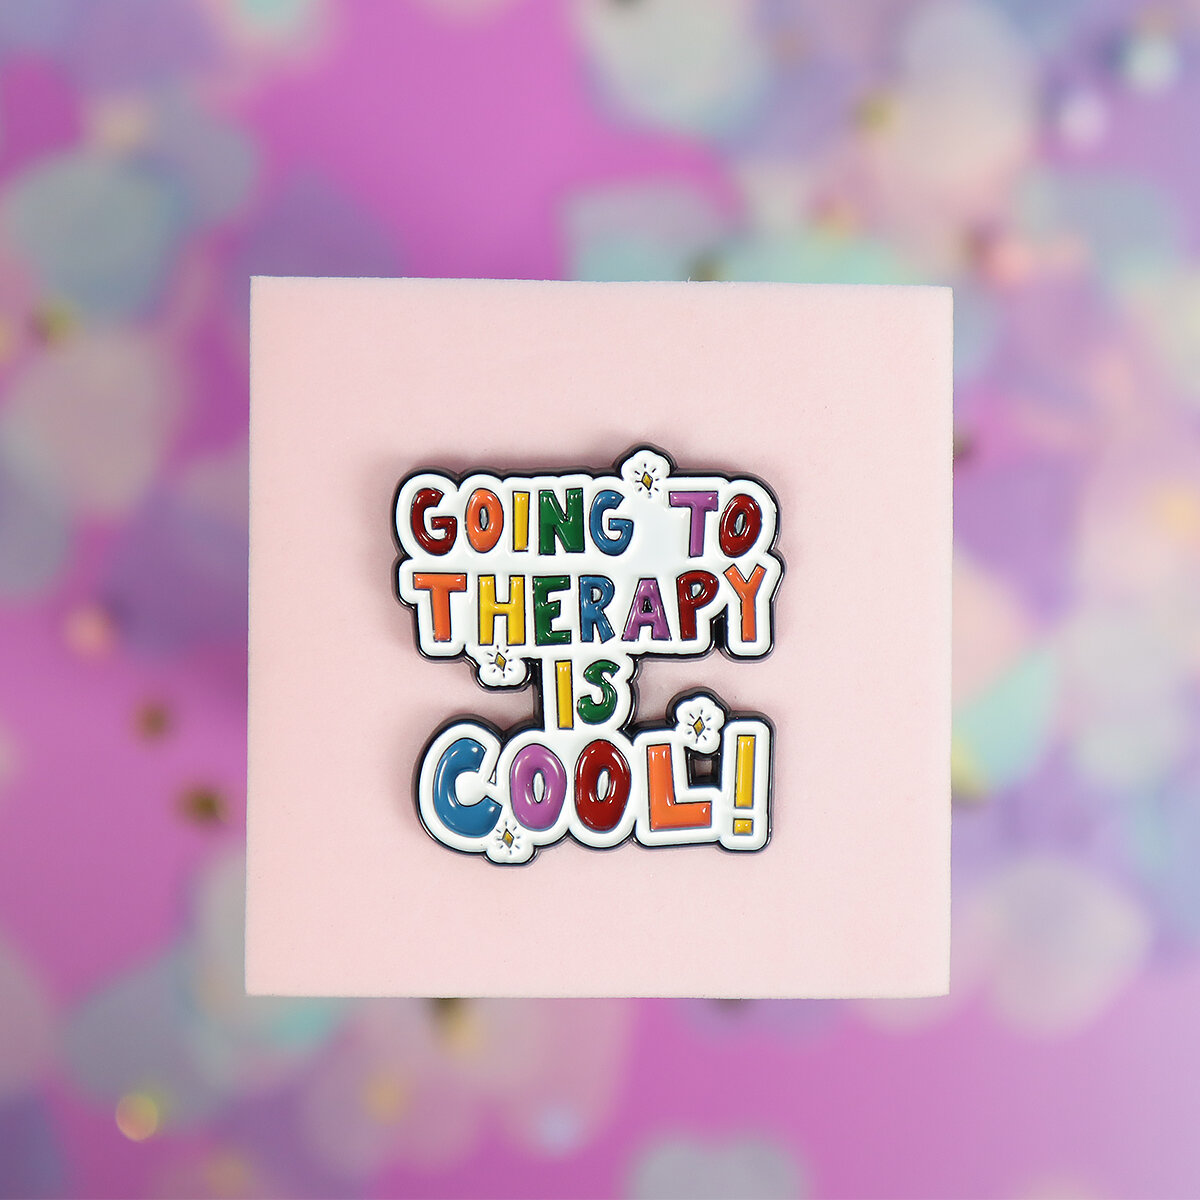 Pin - Going to therapy is cool!